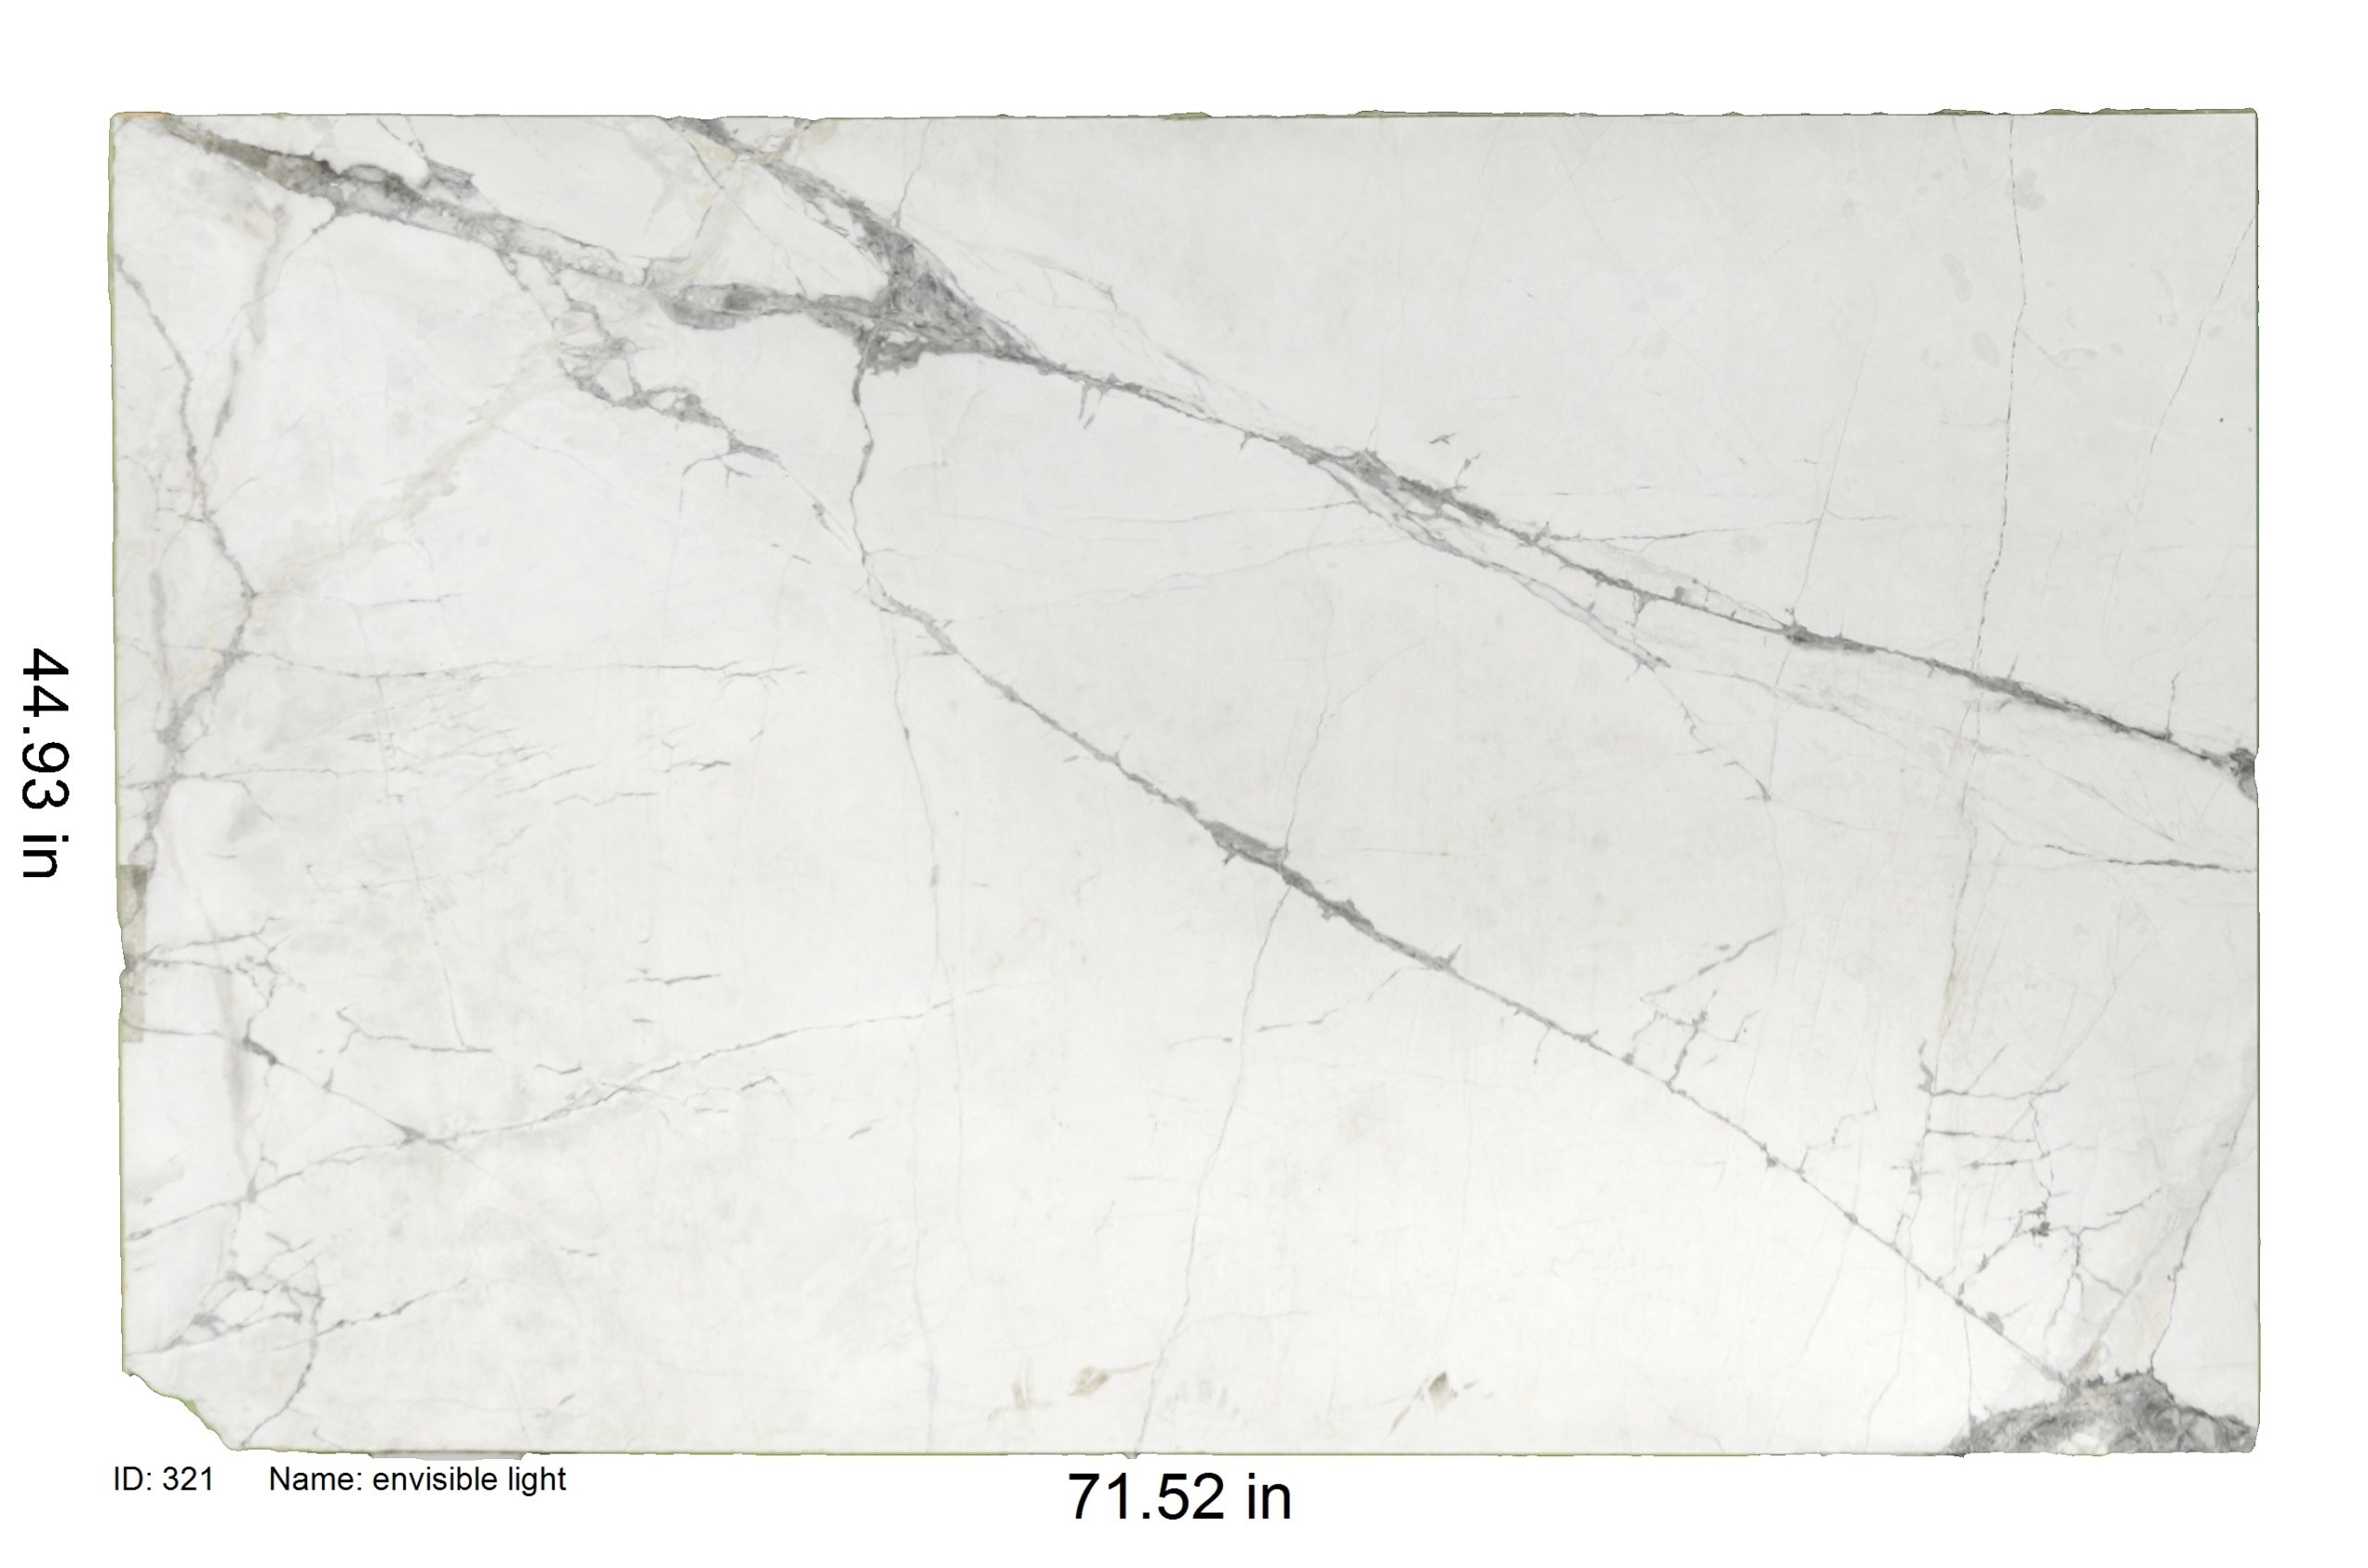 White Marble With Heavy Grey Veining<br />
ID: 321<br />
Name: Envisible Light<br />
Size: 44.93x71.52